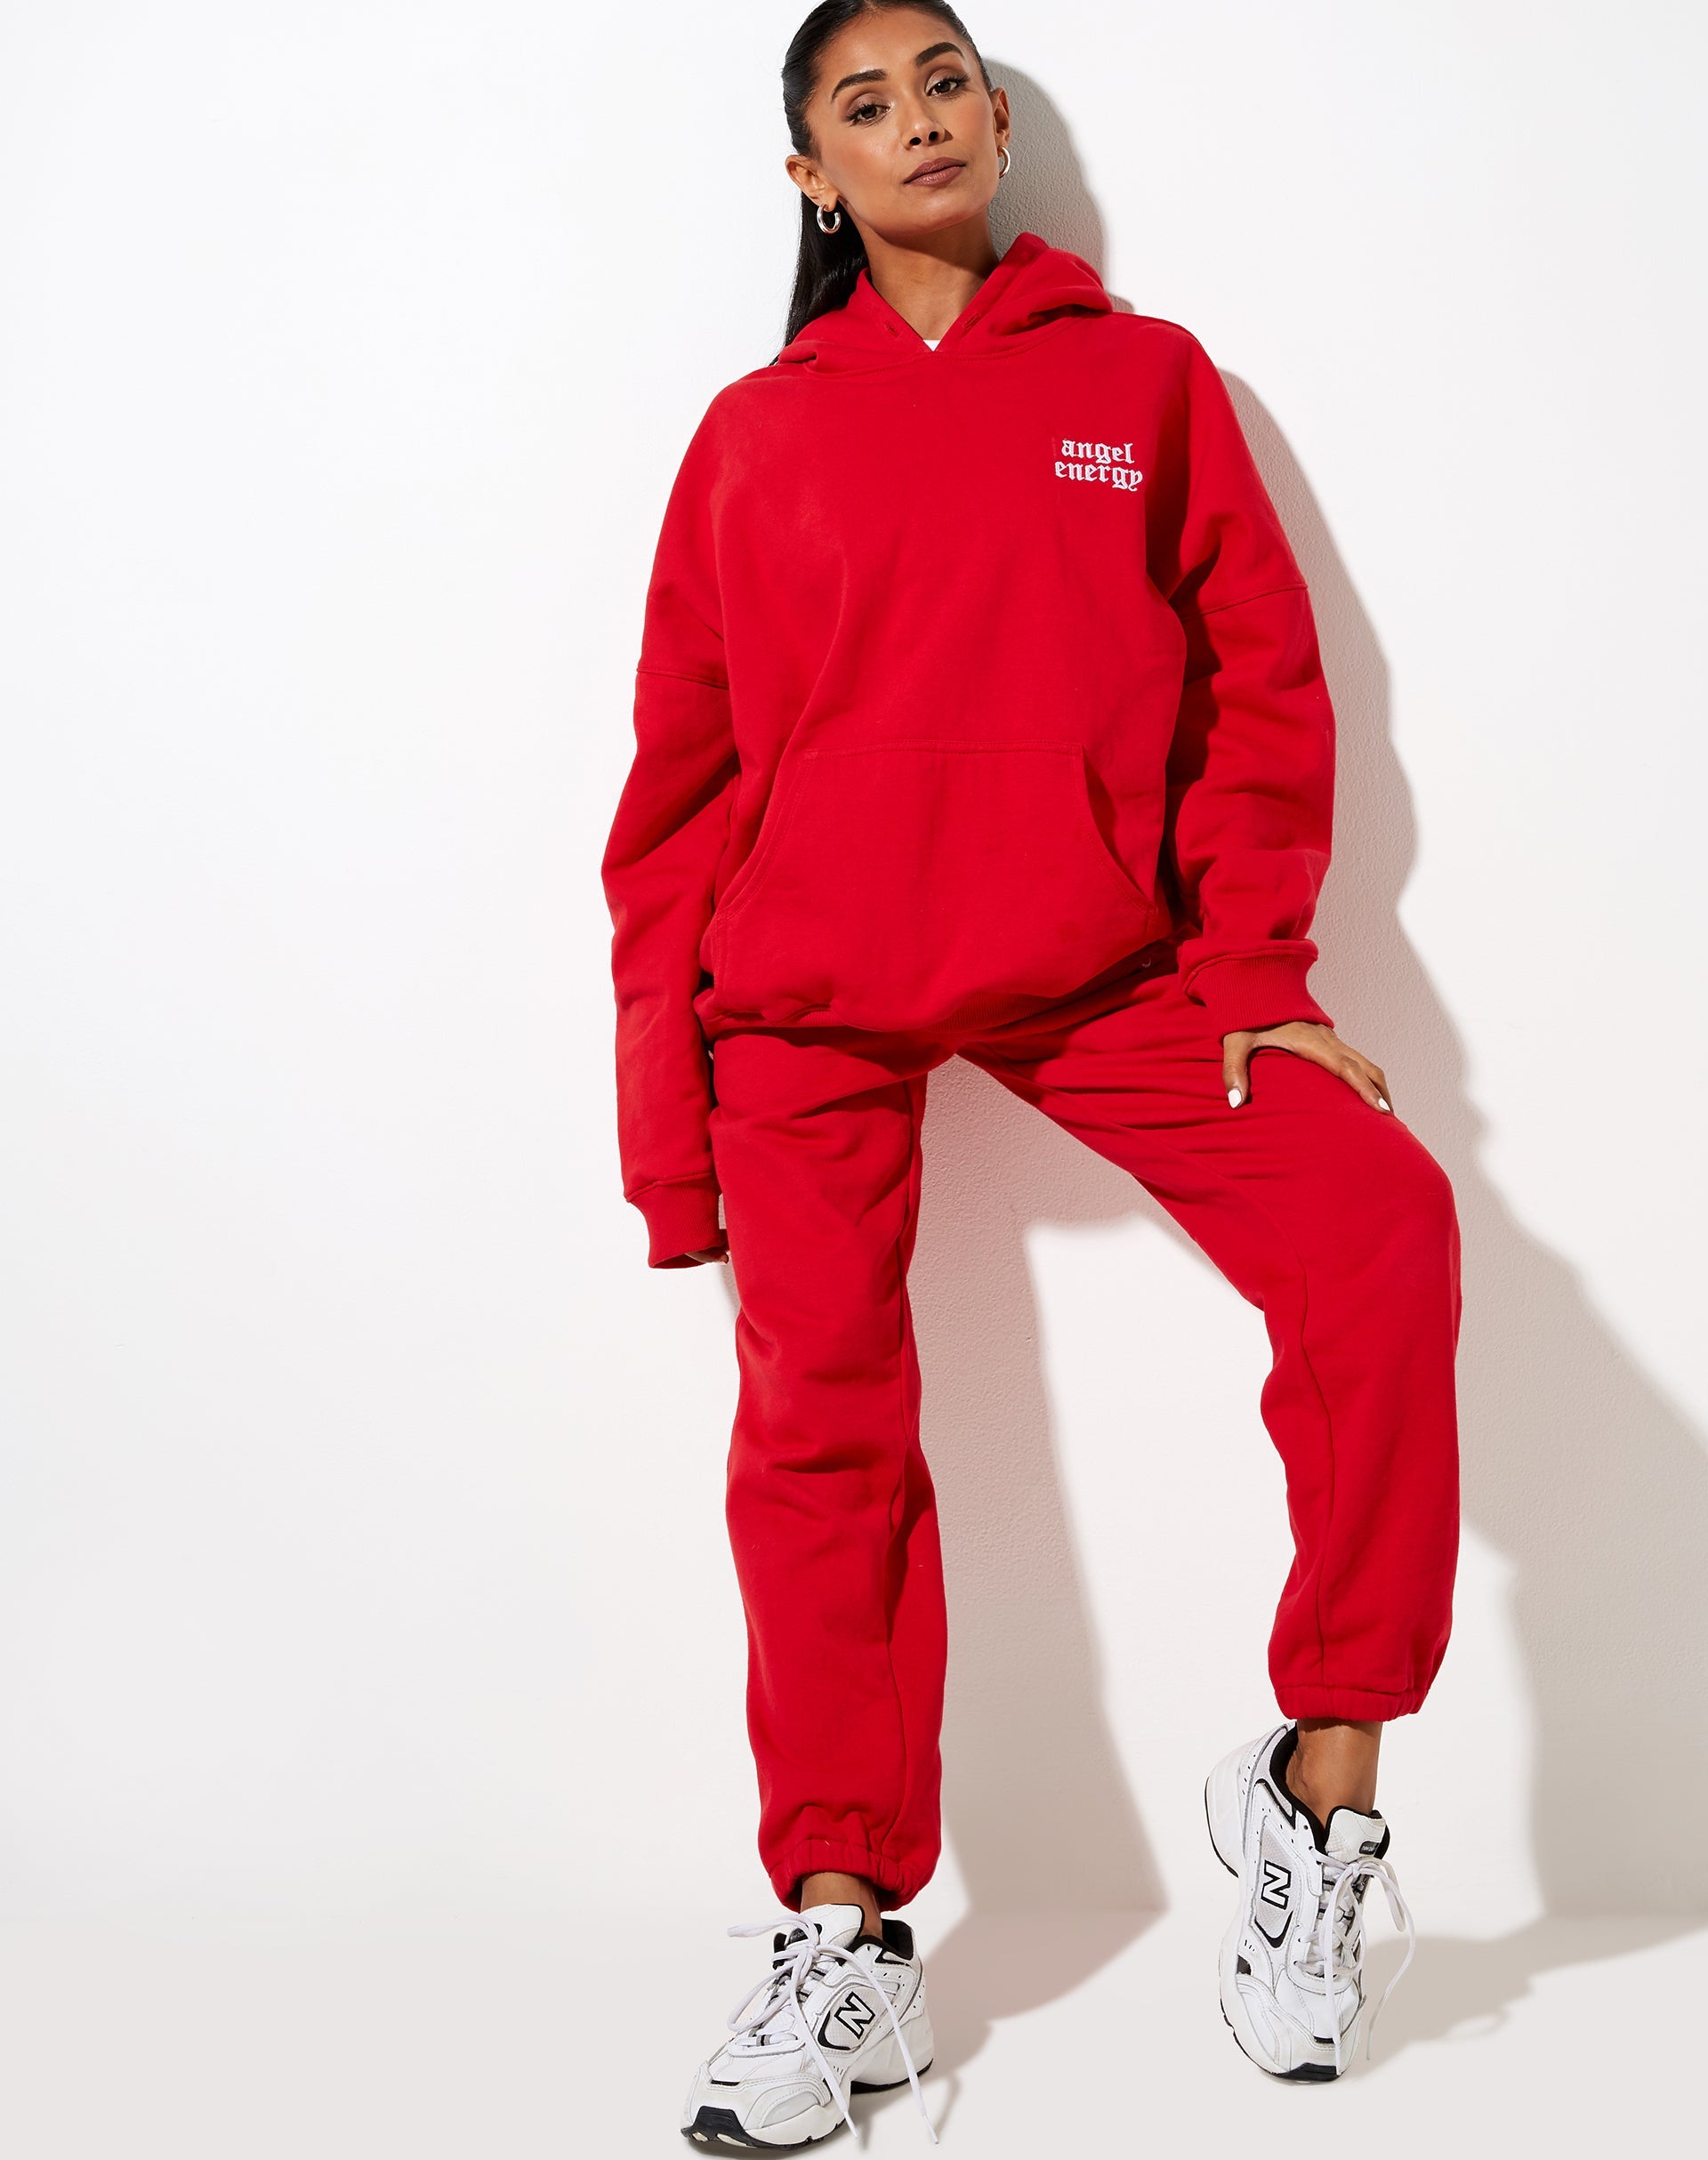 Image of Oversize Hoodie in Racing Red with Angel Energy Embro